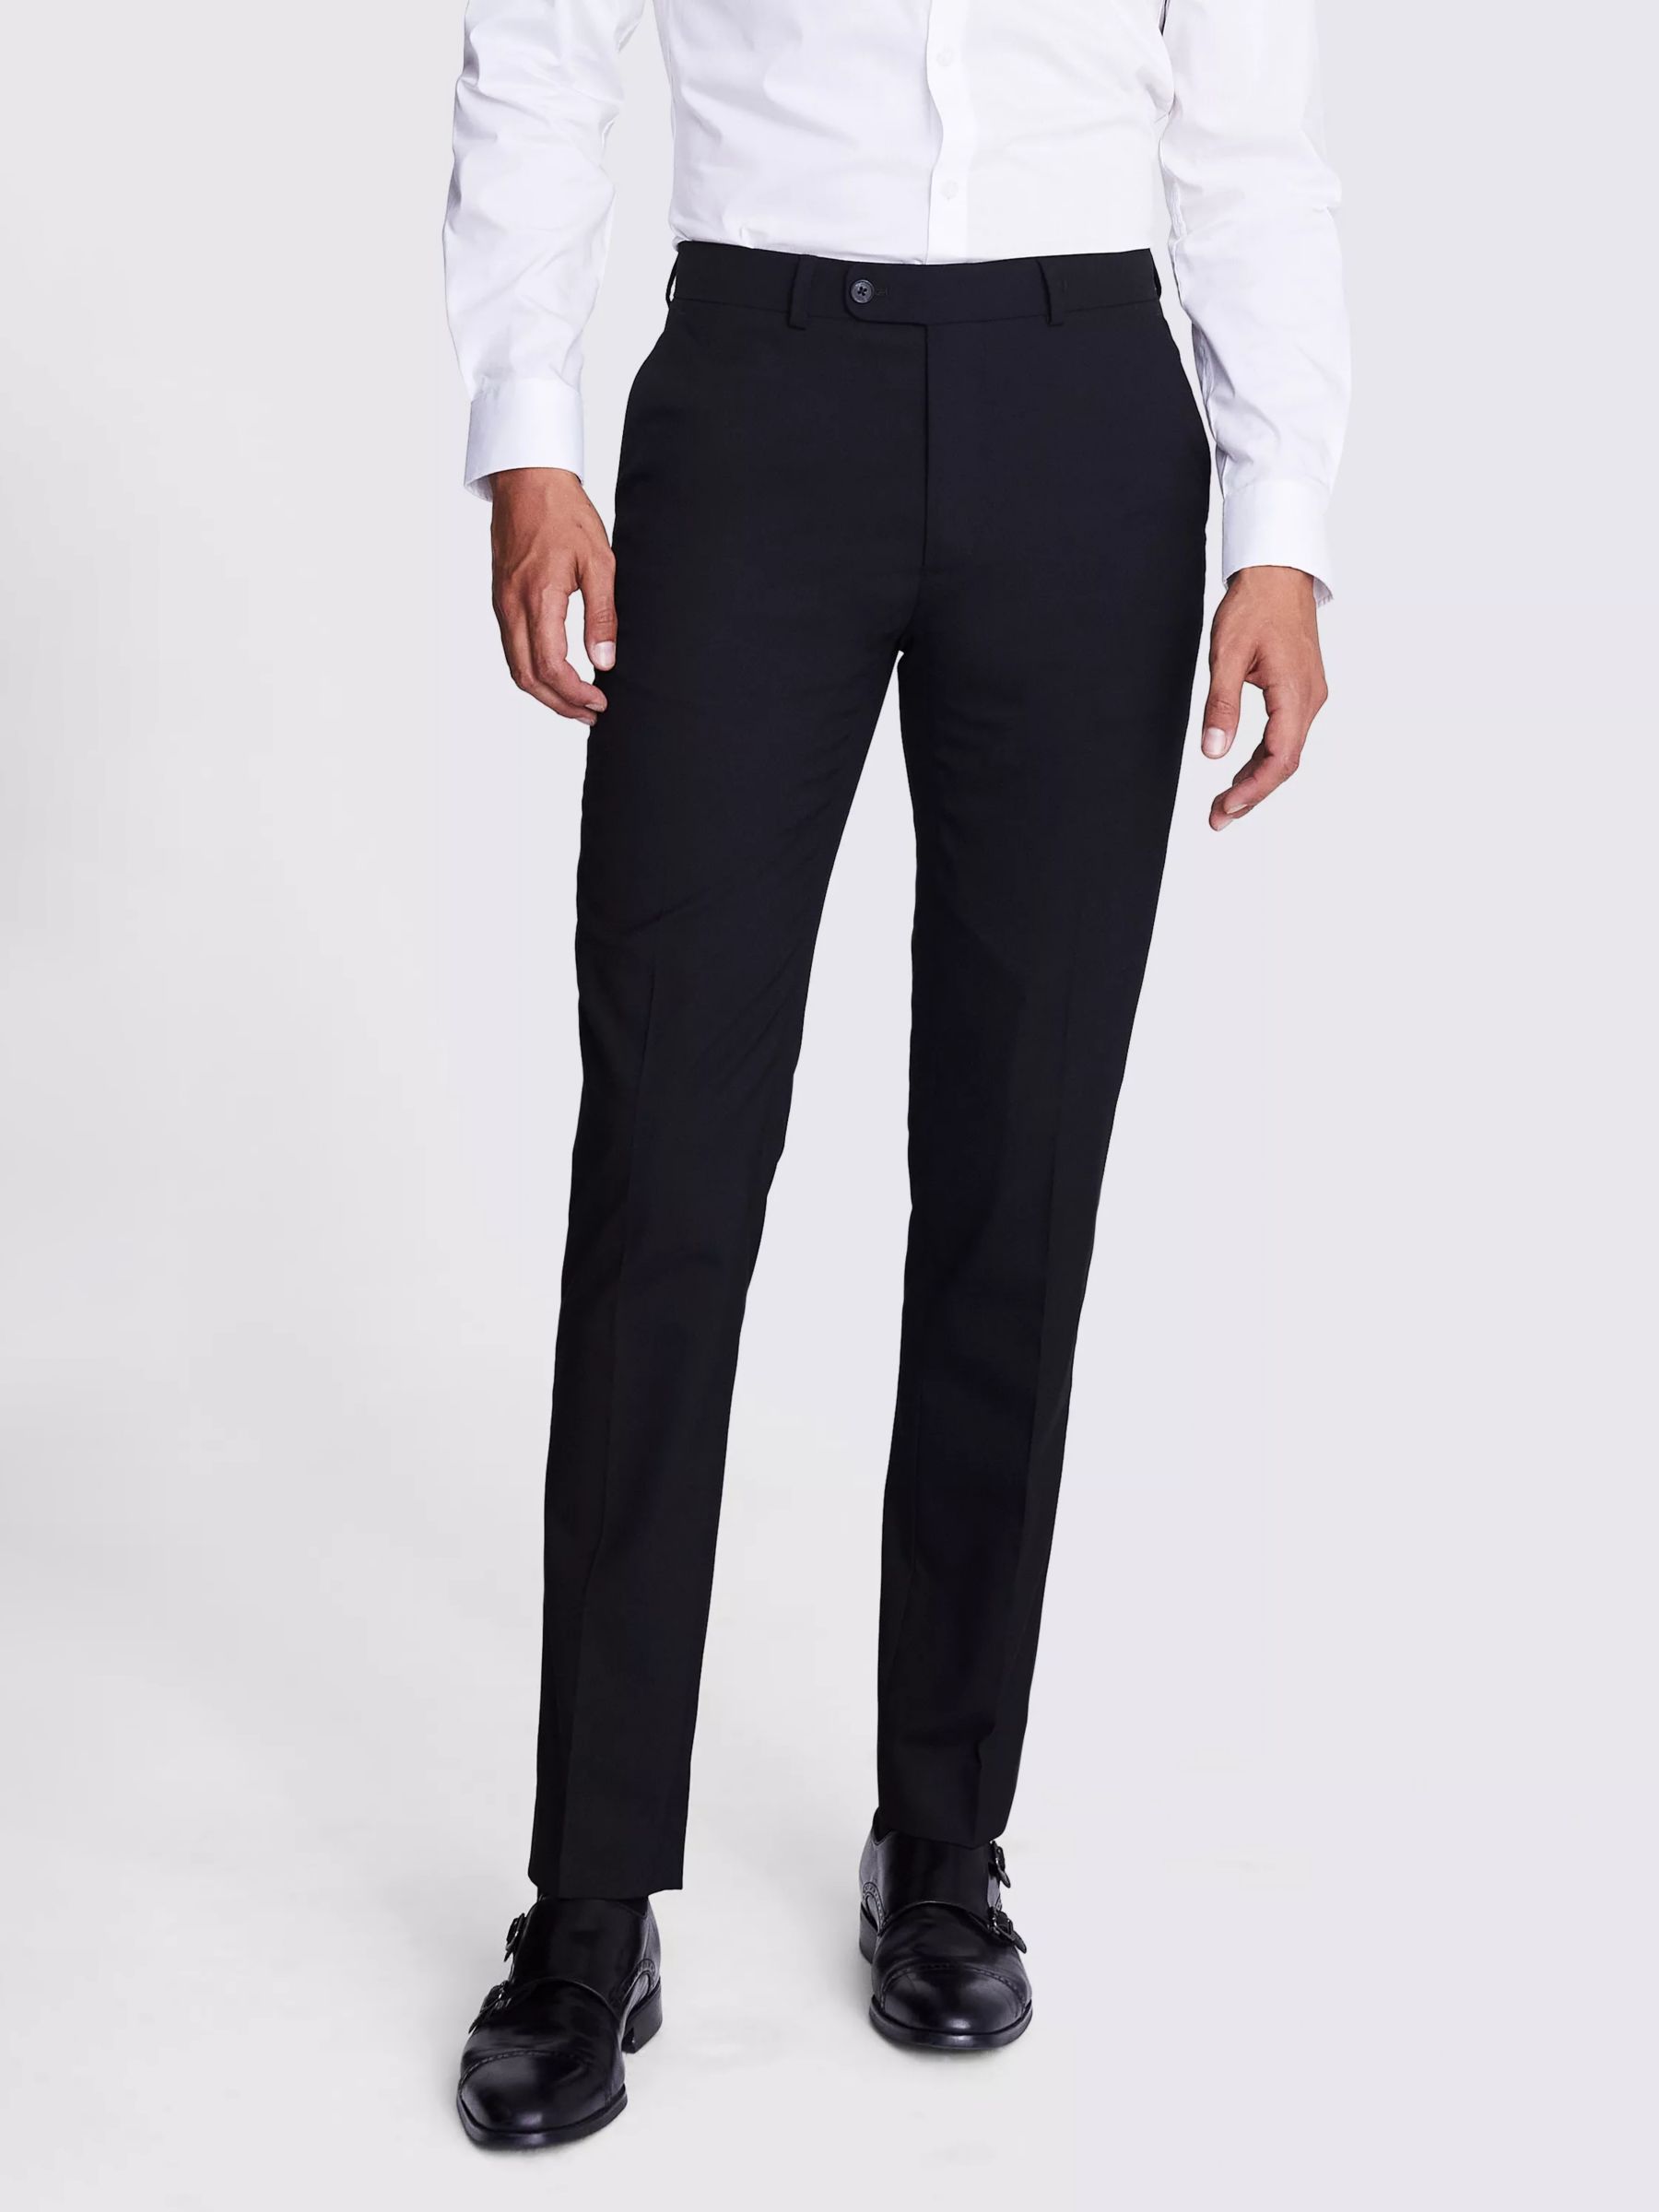 Moss Tailored Fit Trousers, Black, 30S